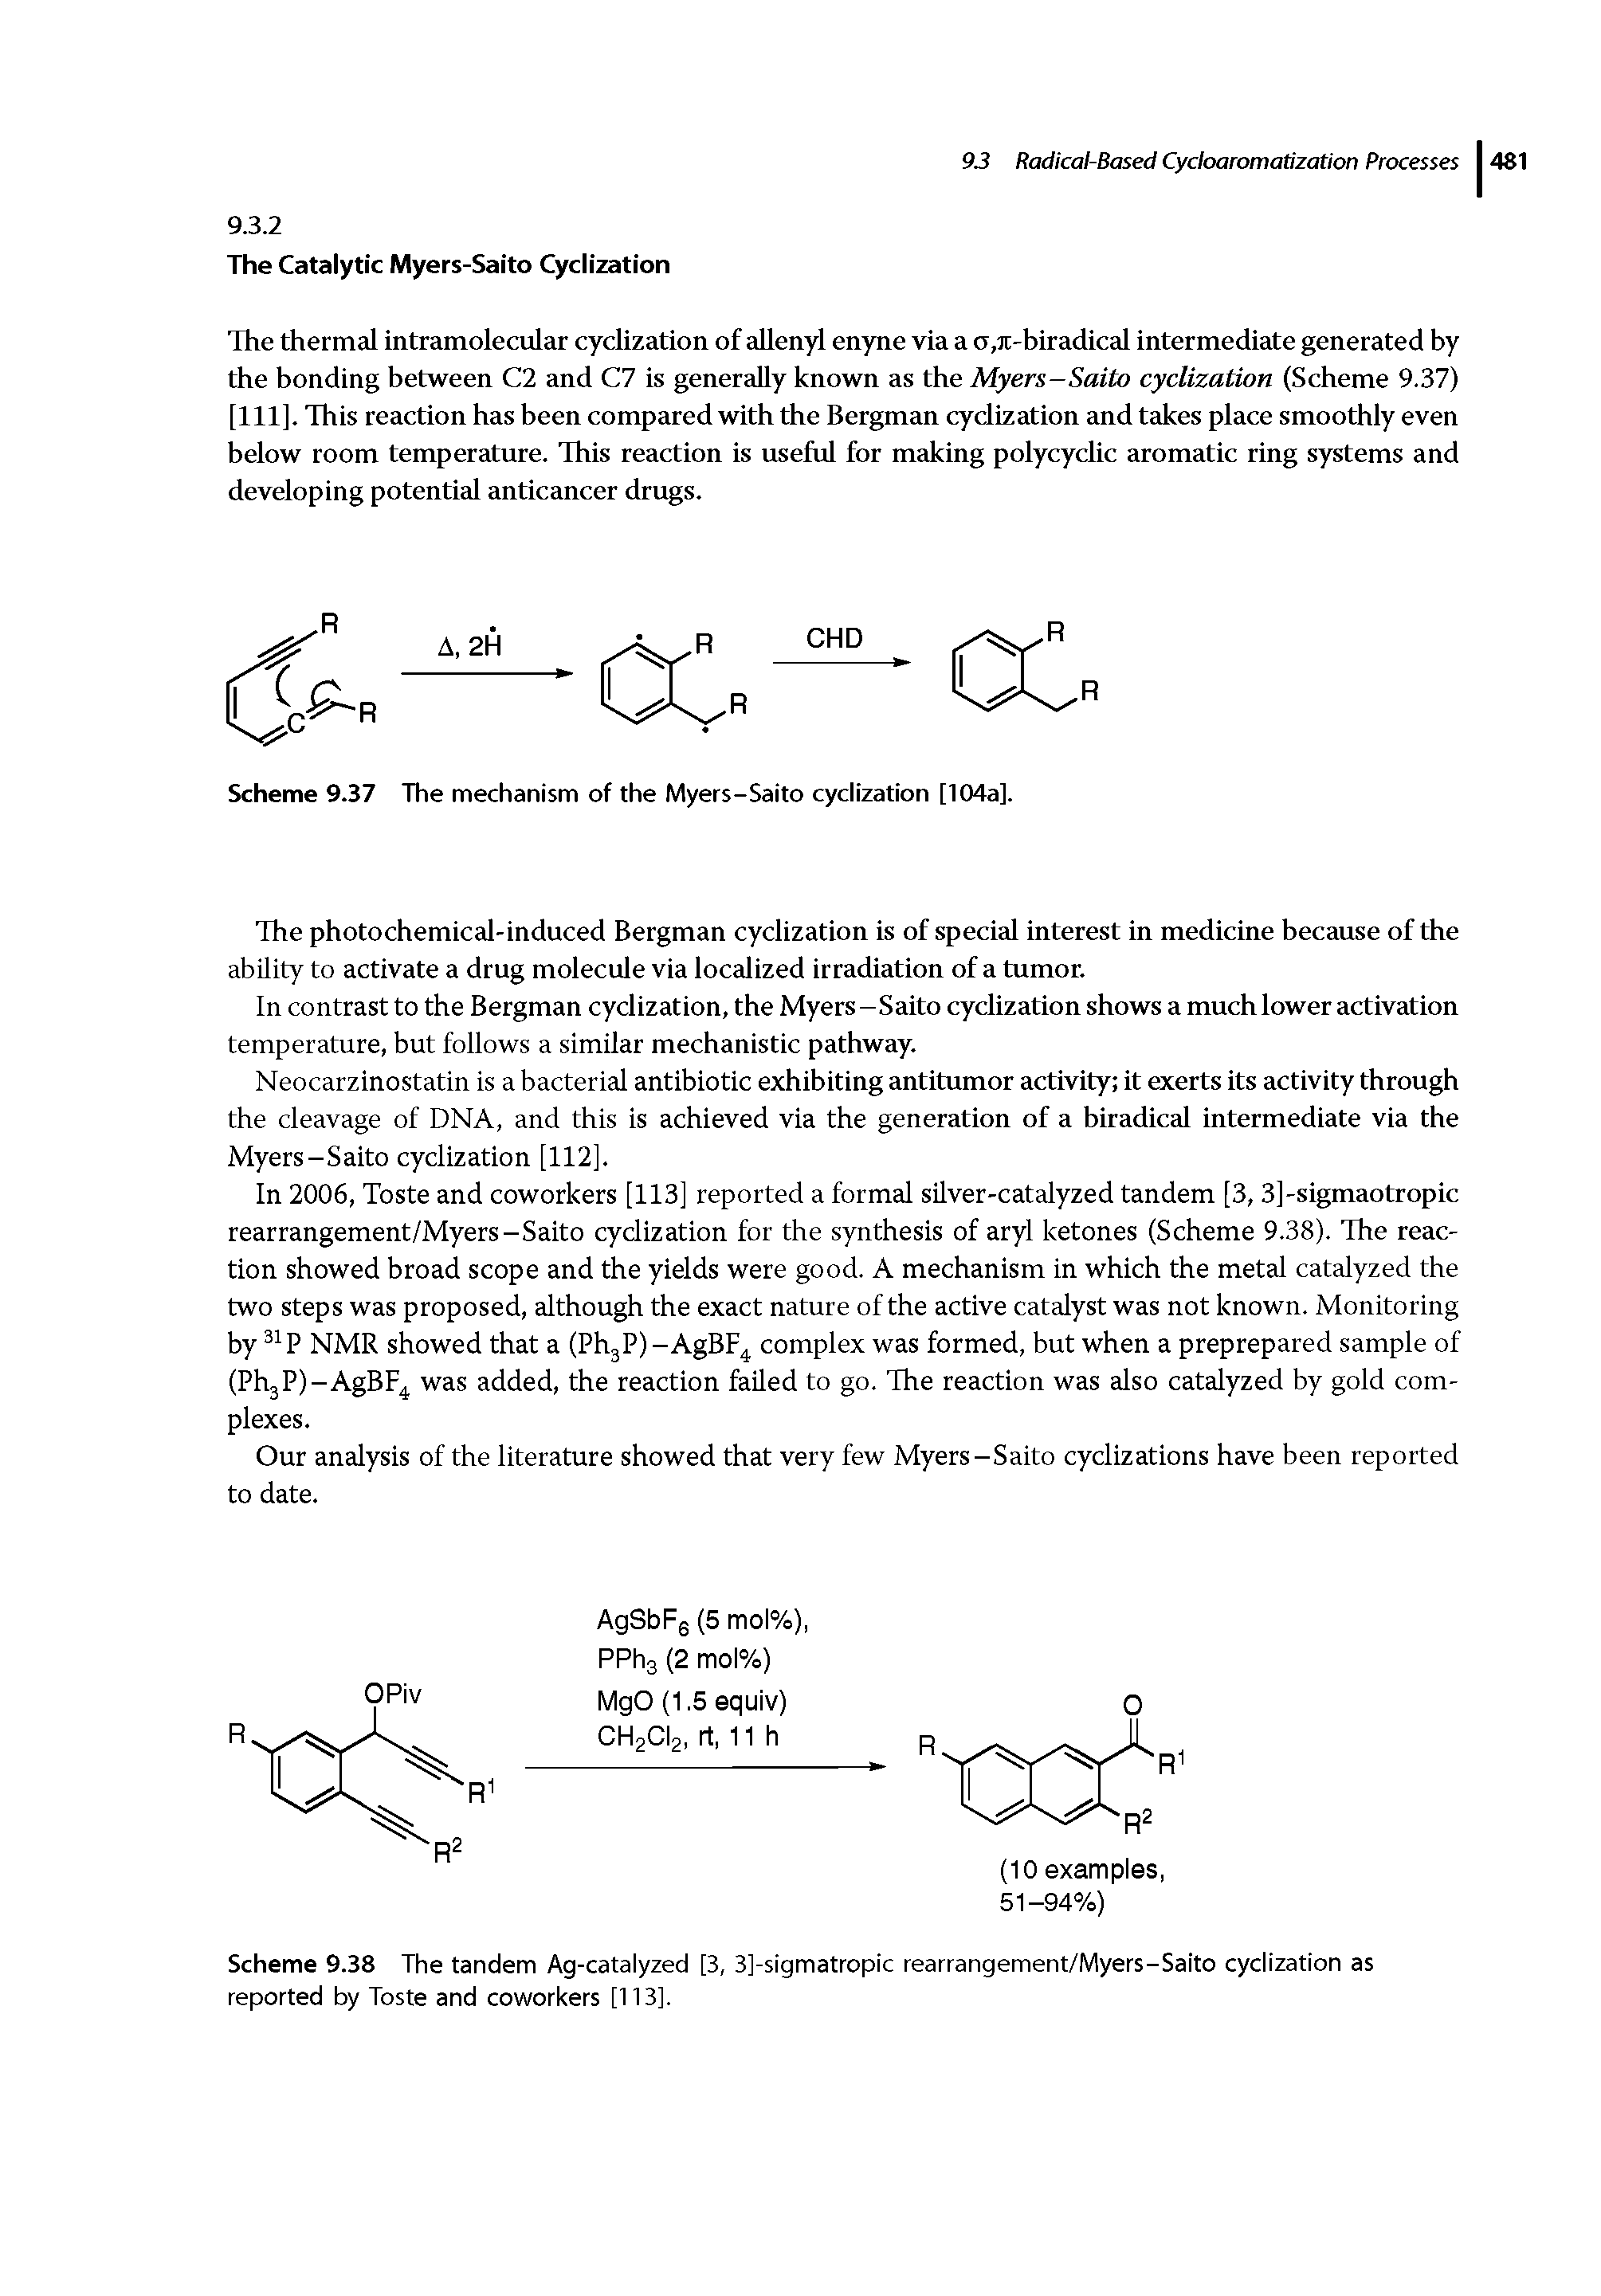 Scheme 9.37 The mechanism of the Myers-Saito cyclization [104a].